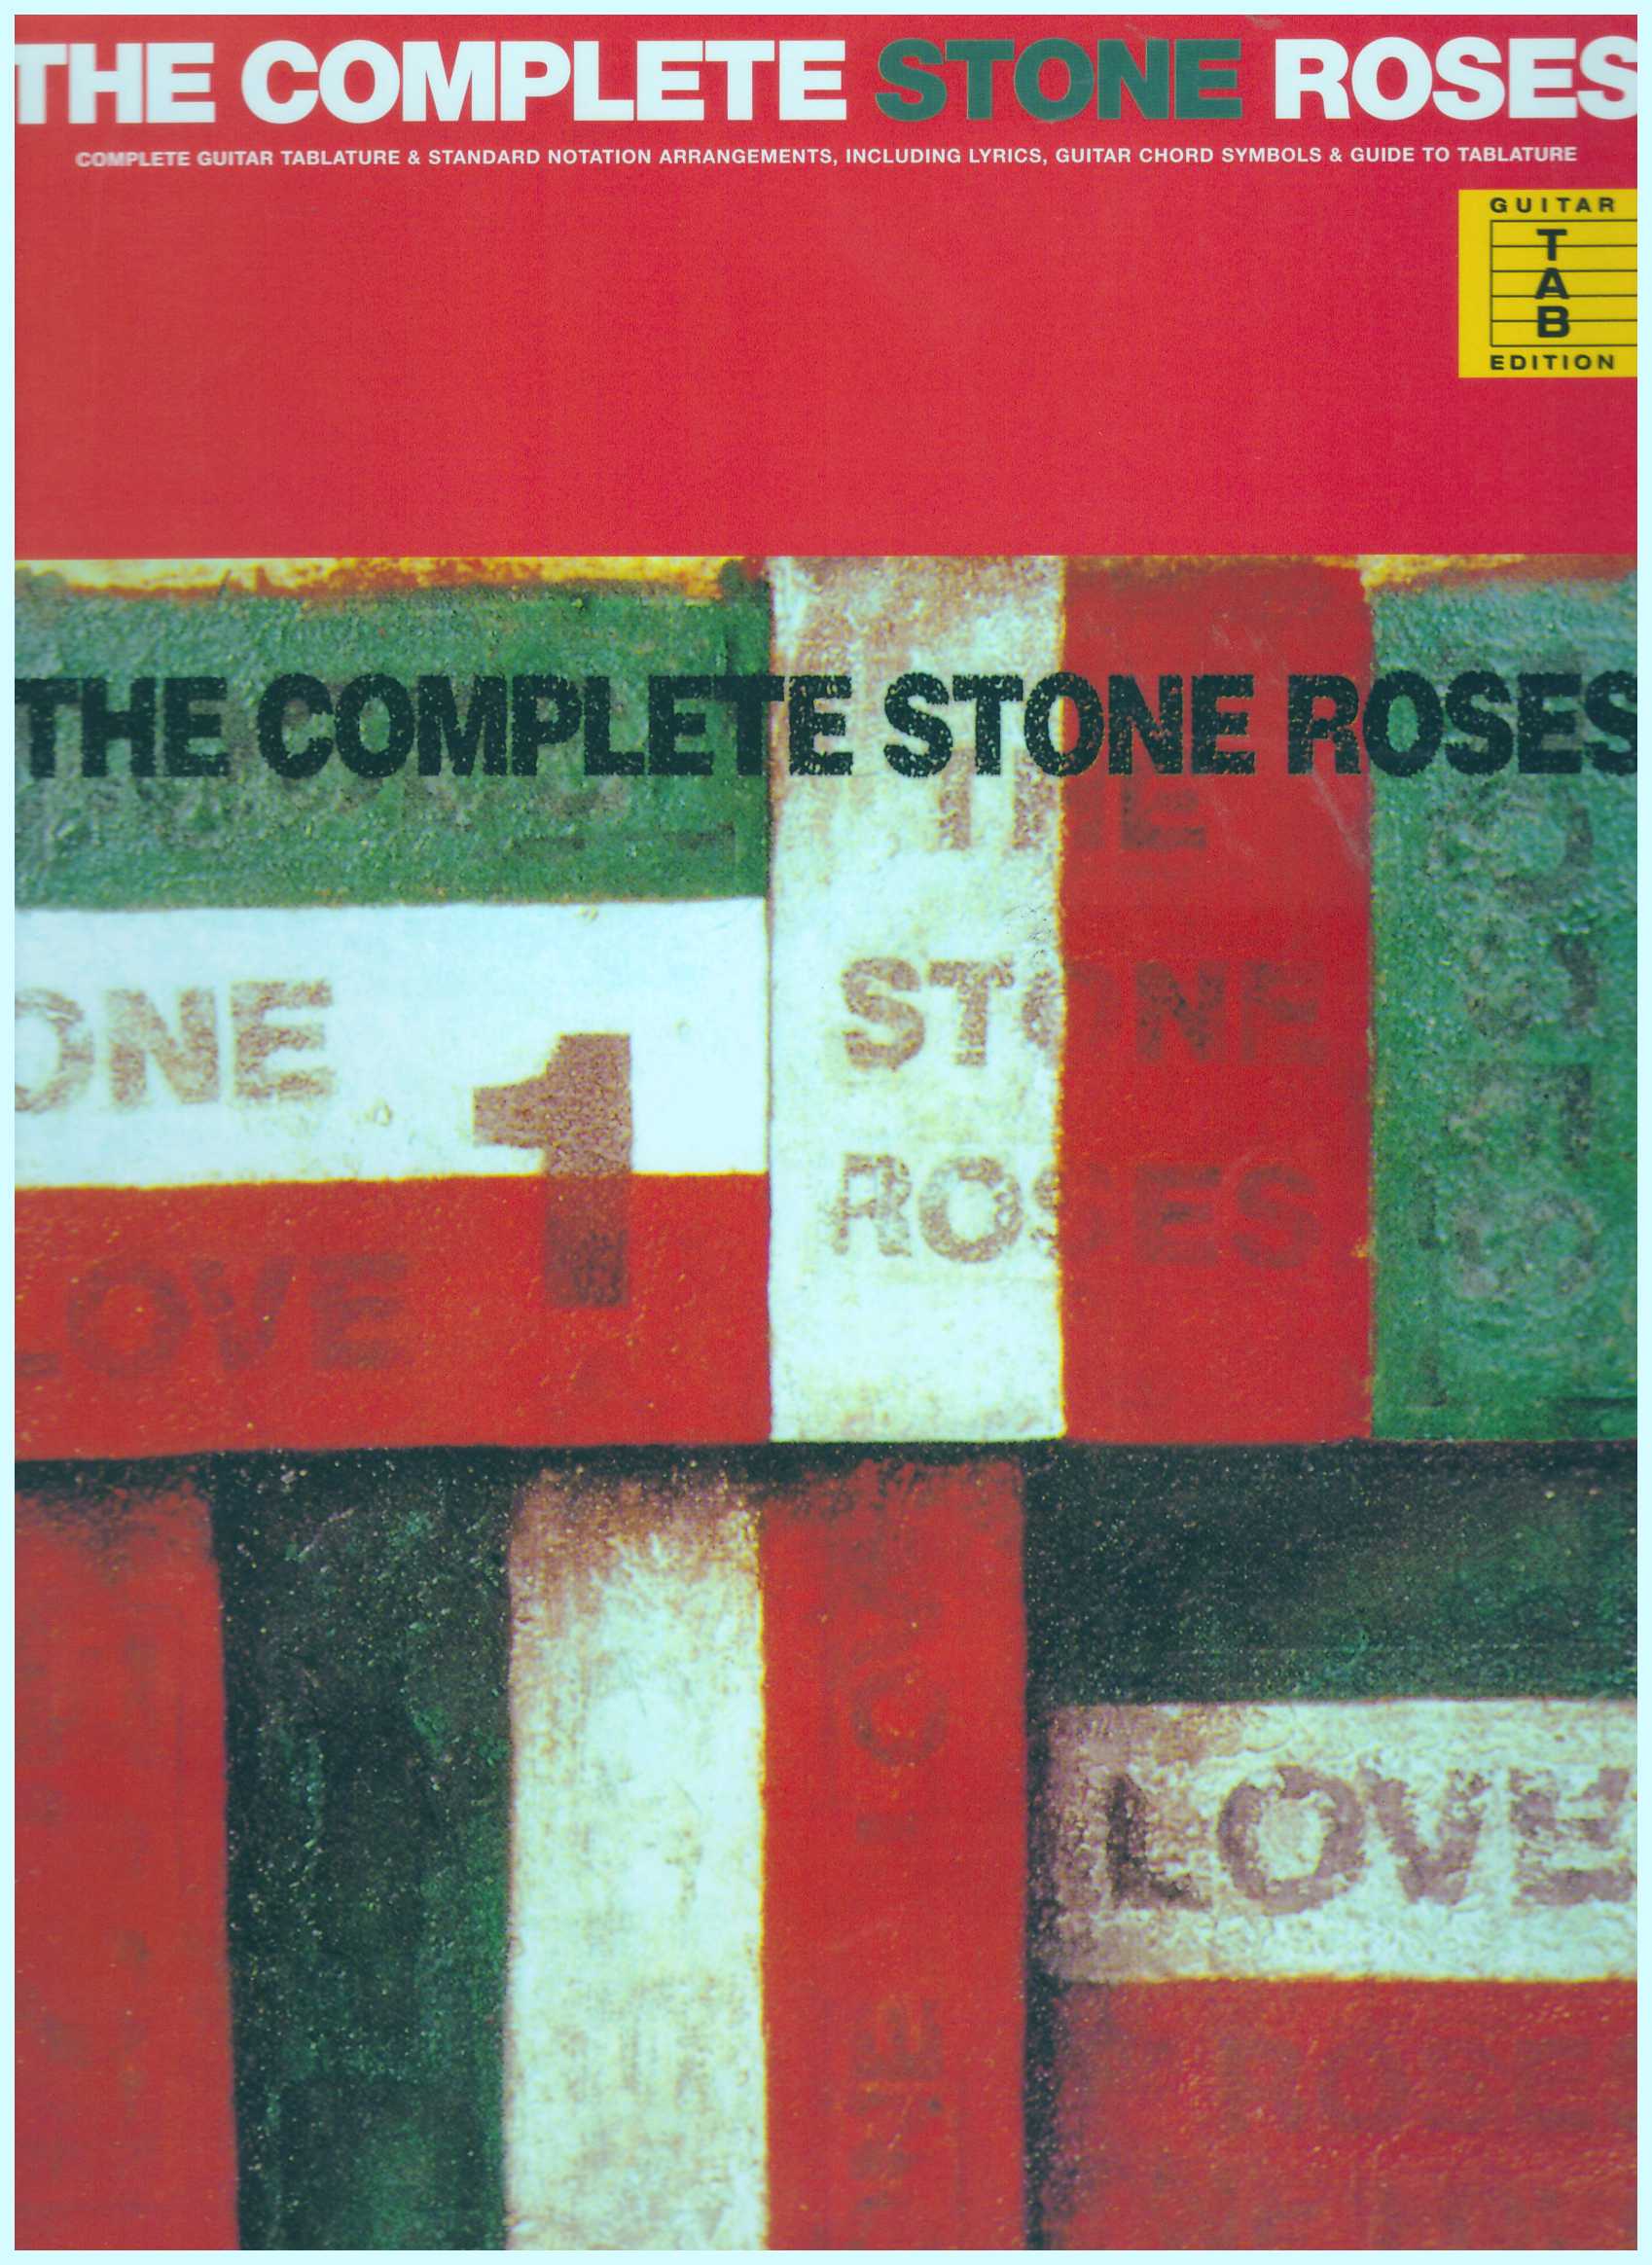 The Complete Stone Roses / Guitar Book / Gitar Book / Tab Book / Guitar Tab Book / Gitar Tab Book